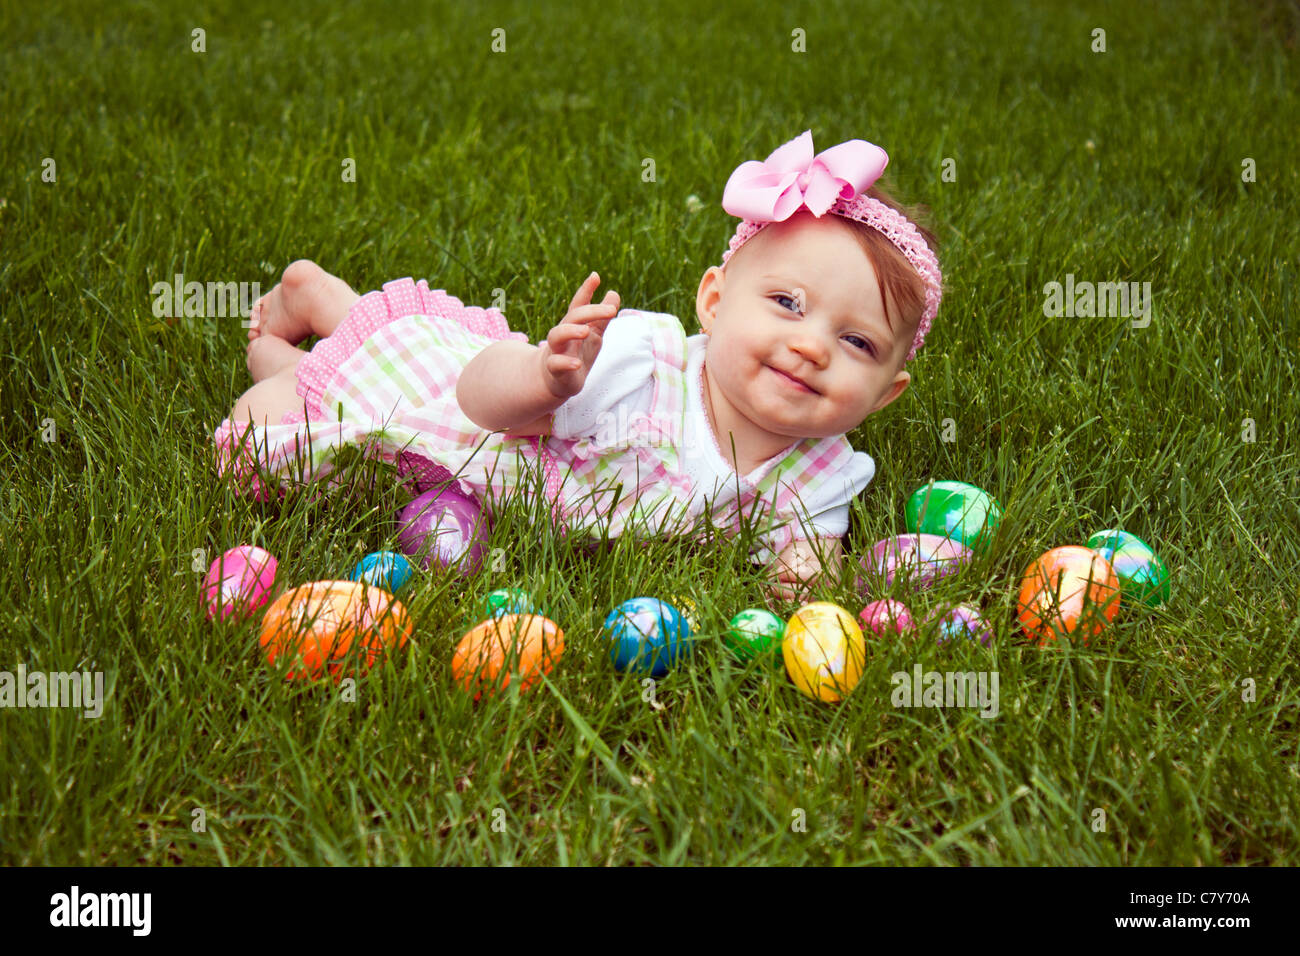 Beautiful baby laying in grass with an assortment of colored Easter eggs Stock Photo